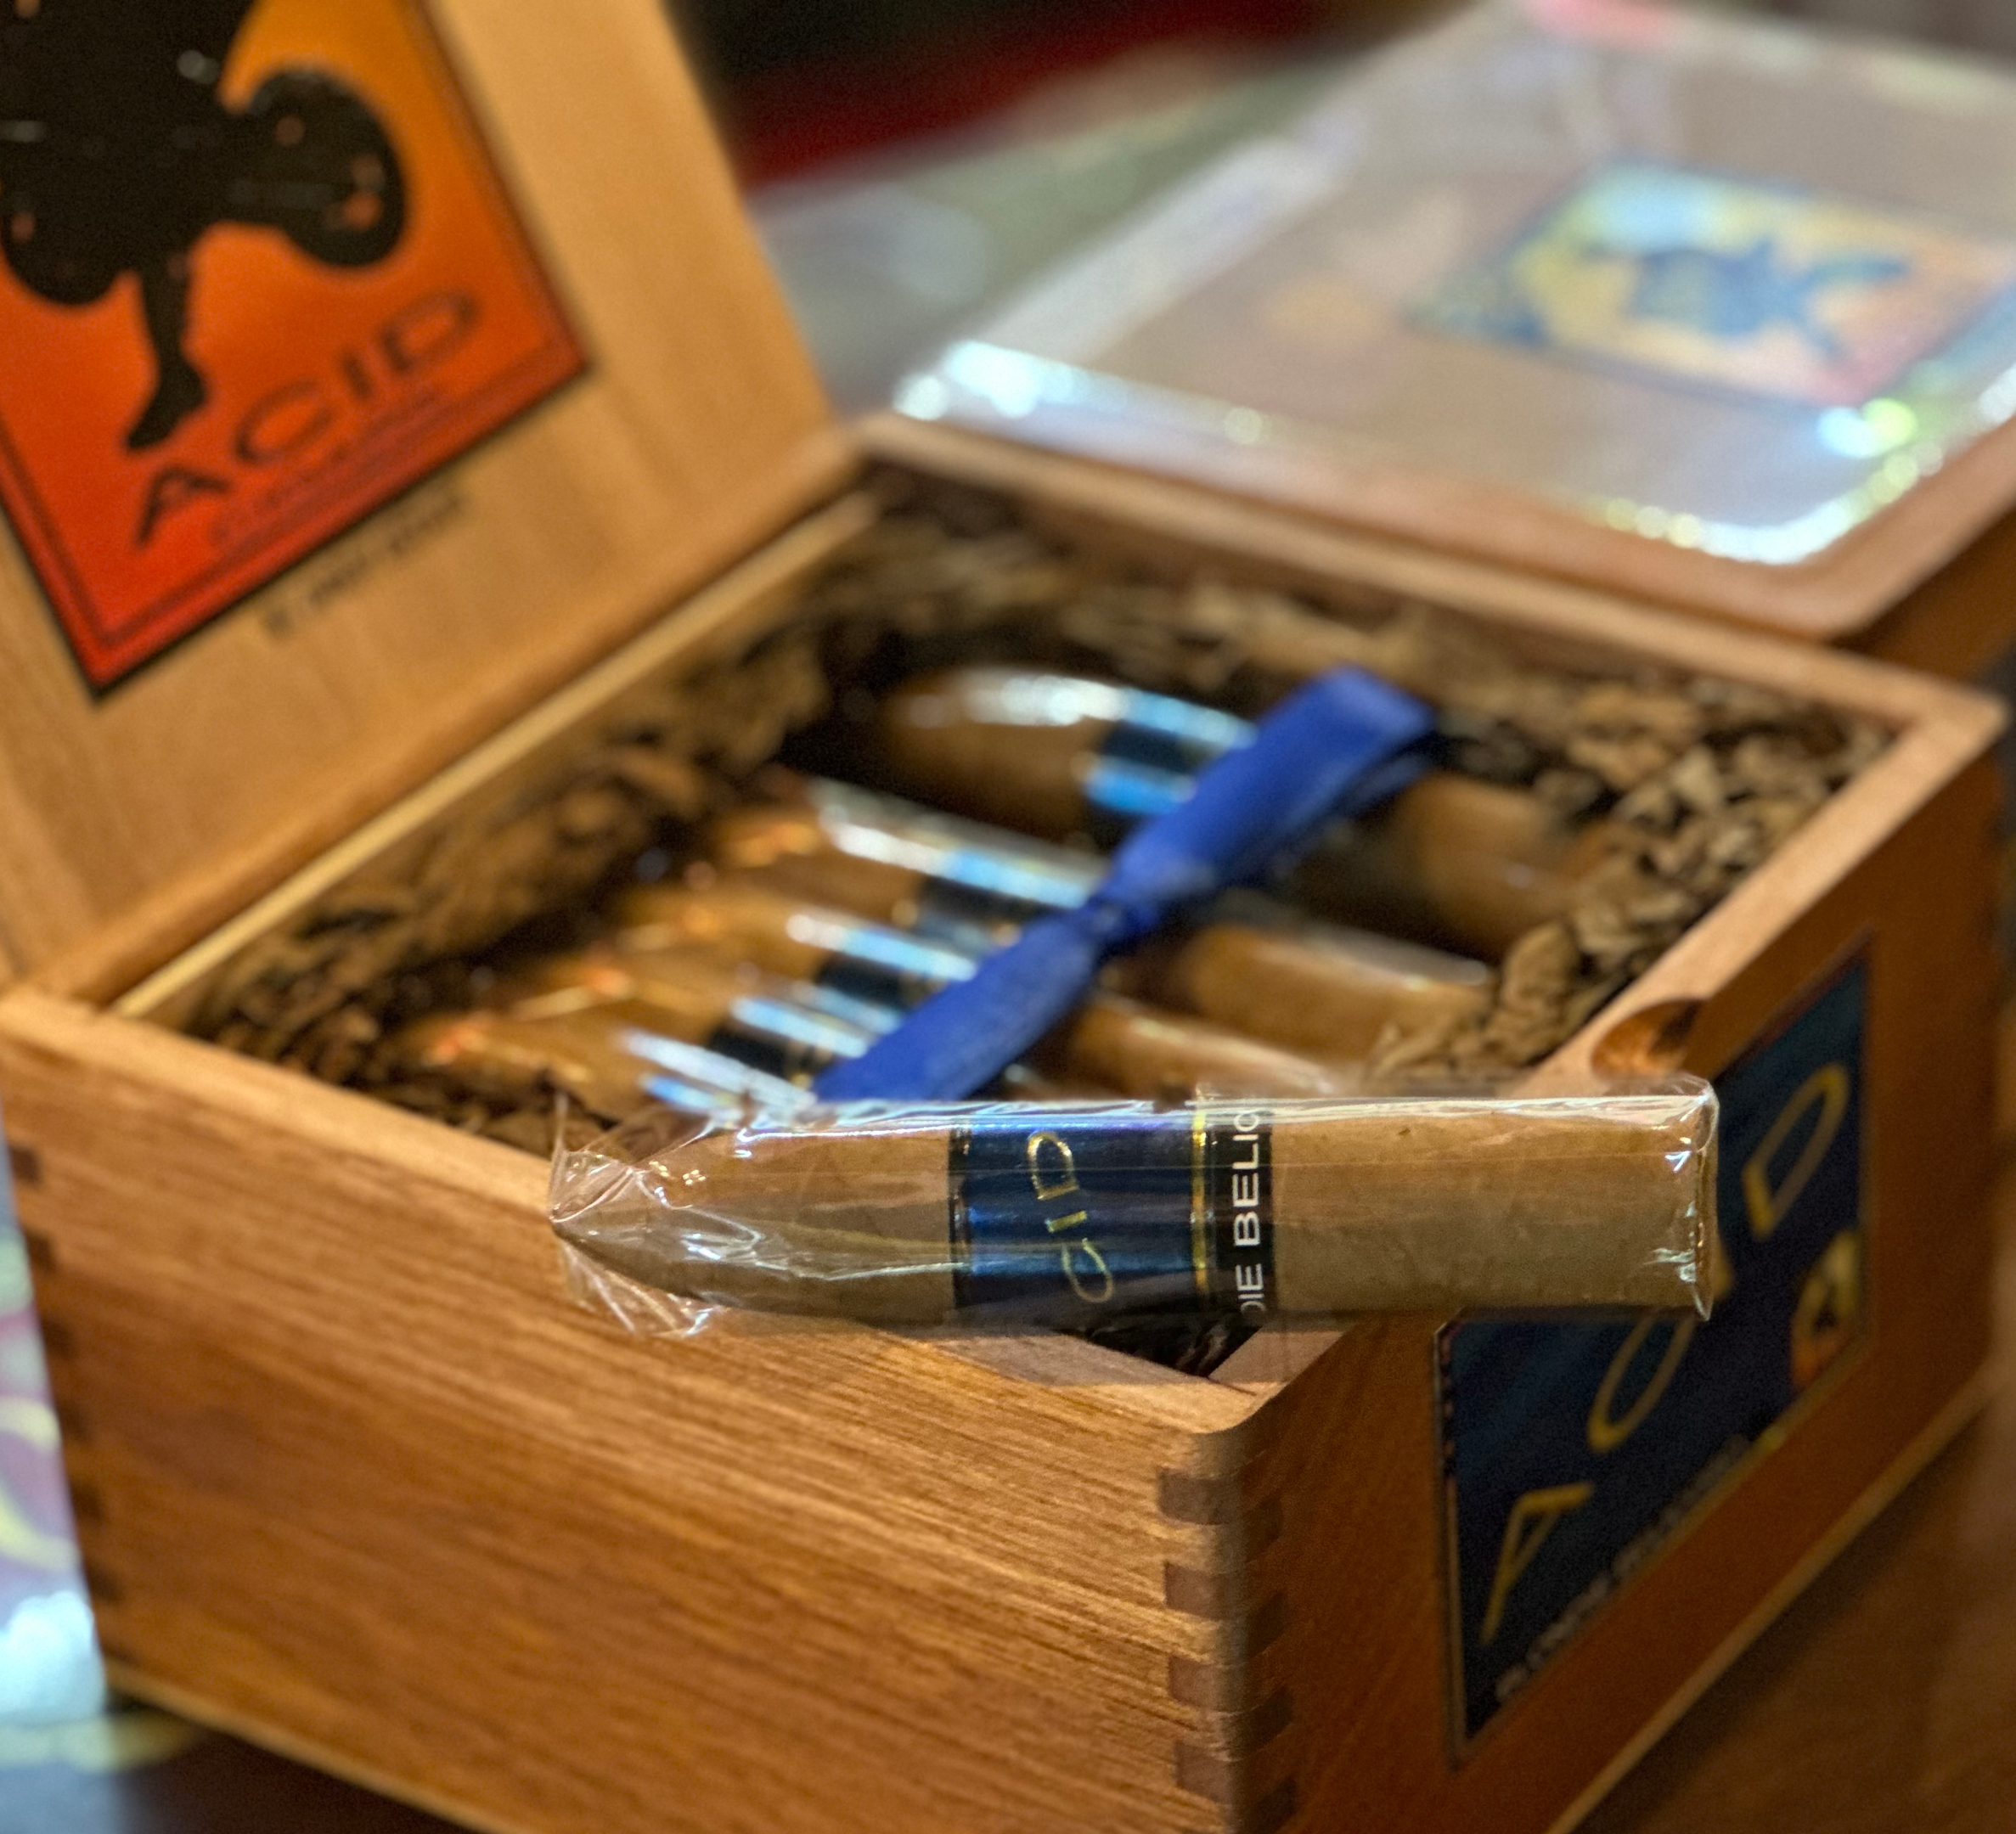 Add to Cart A box of ACID Blondie Belicoso